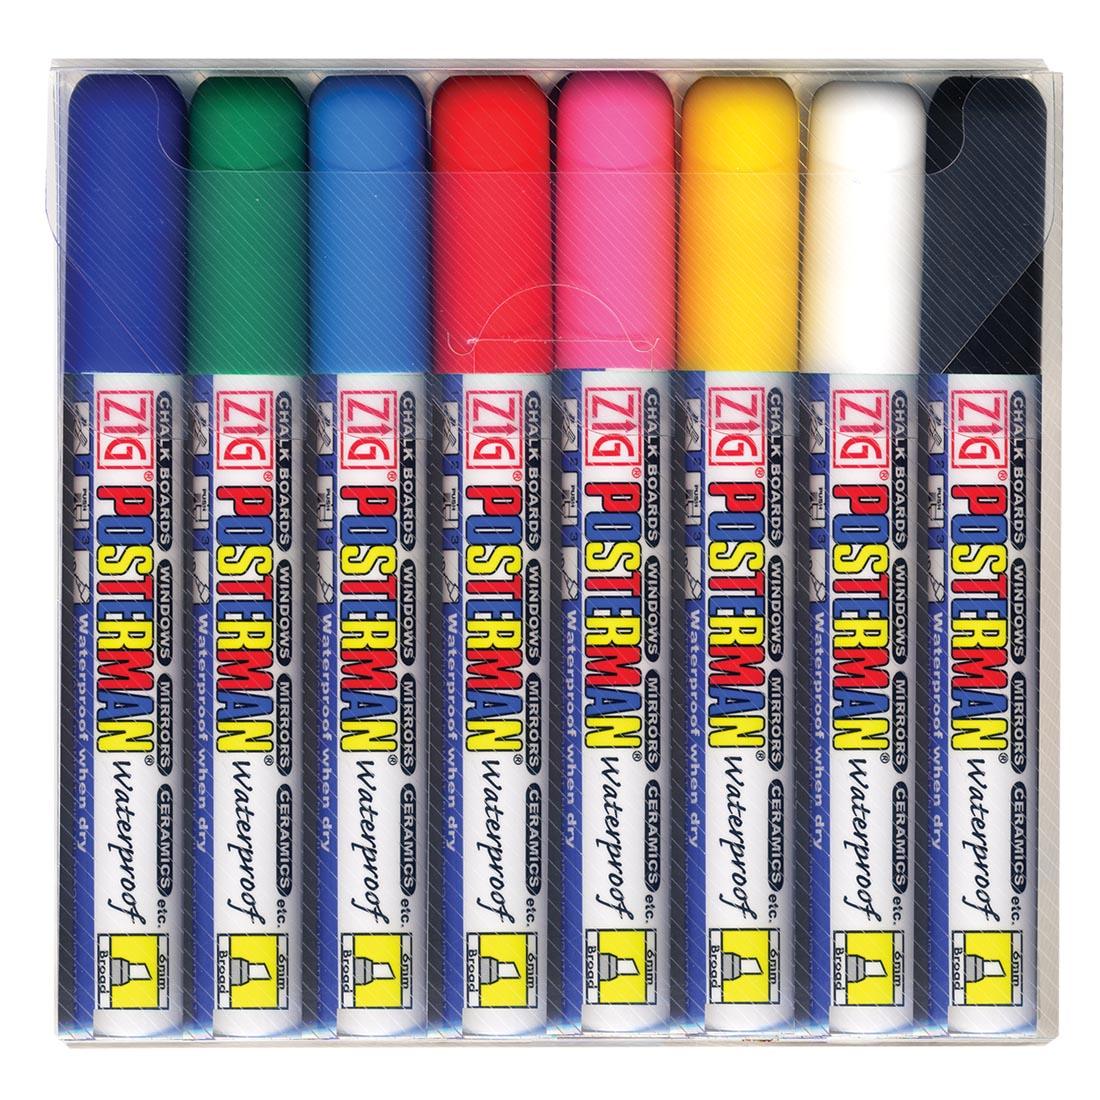 ZIG POSTERMAN 6mm Paint Marker Set featuring 8 different colors